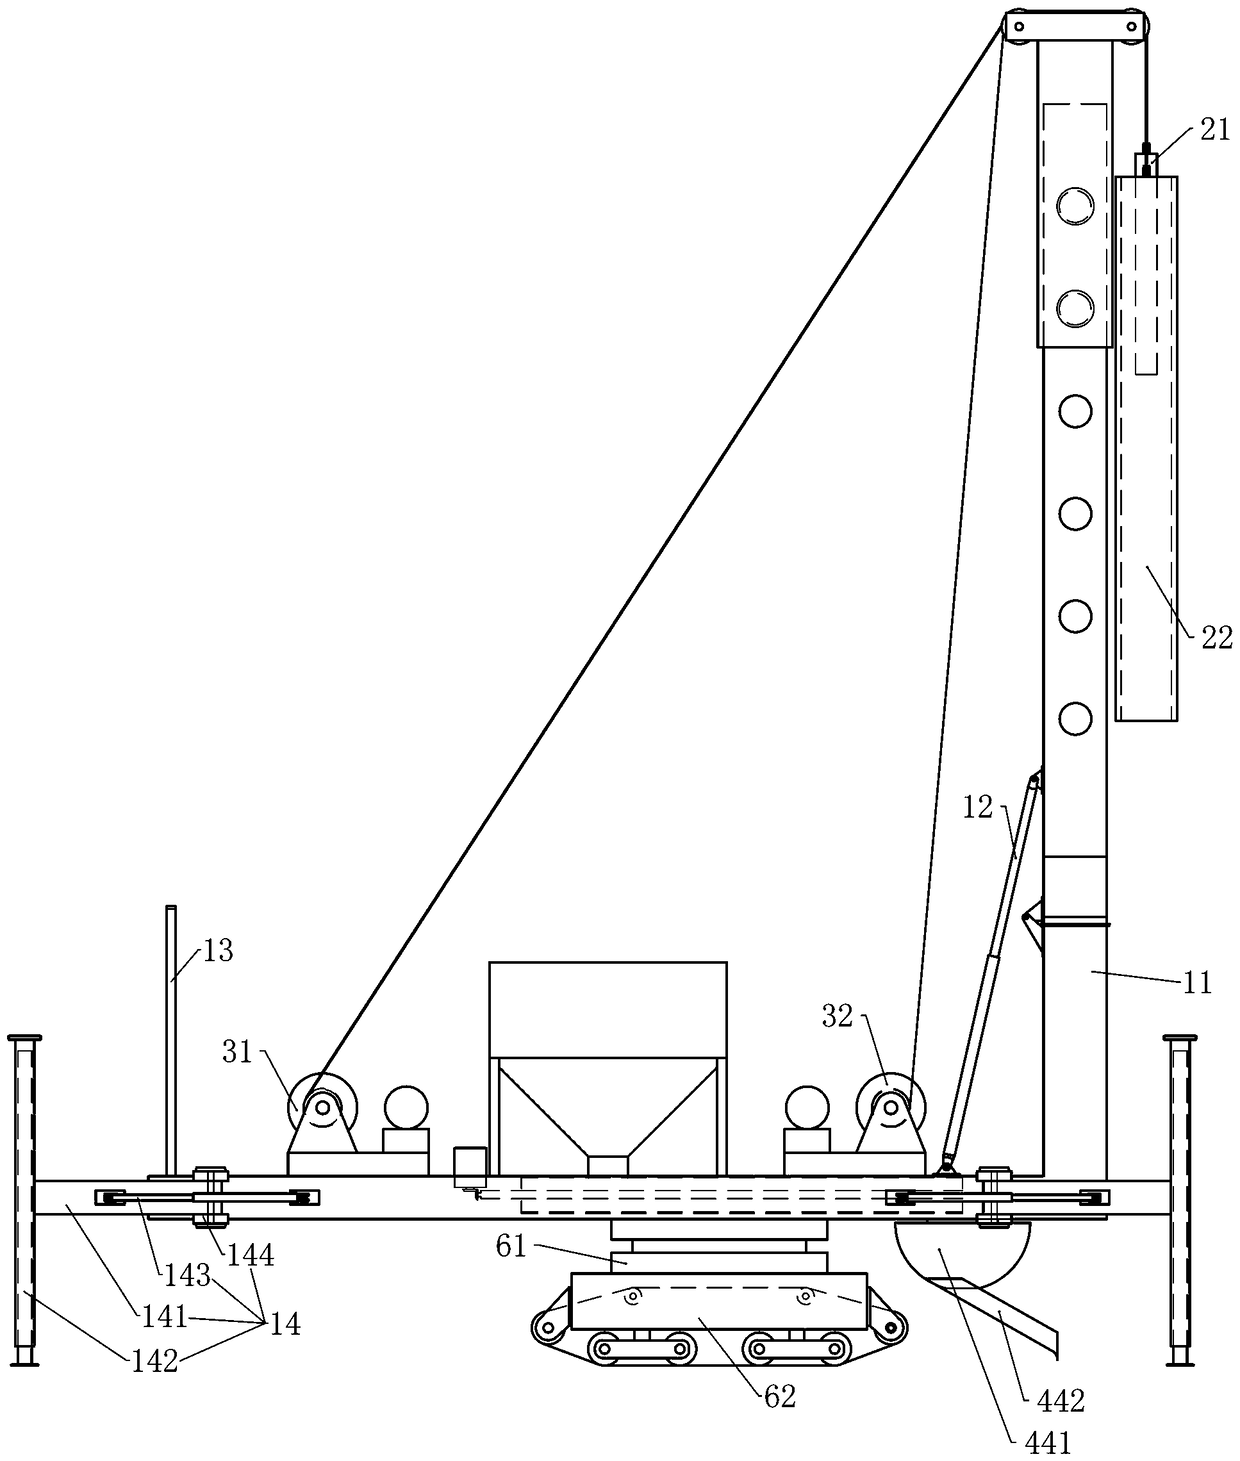 Automatic filling and compacting equipment and construction method for compaction pile foundation treatment